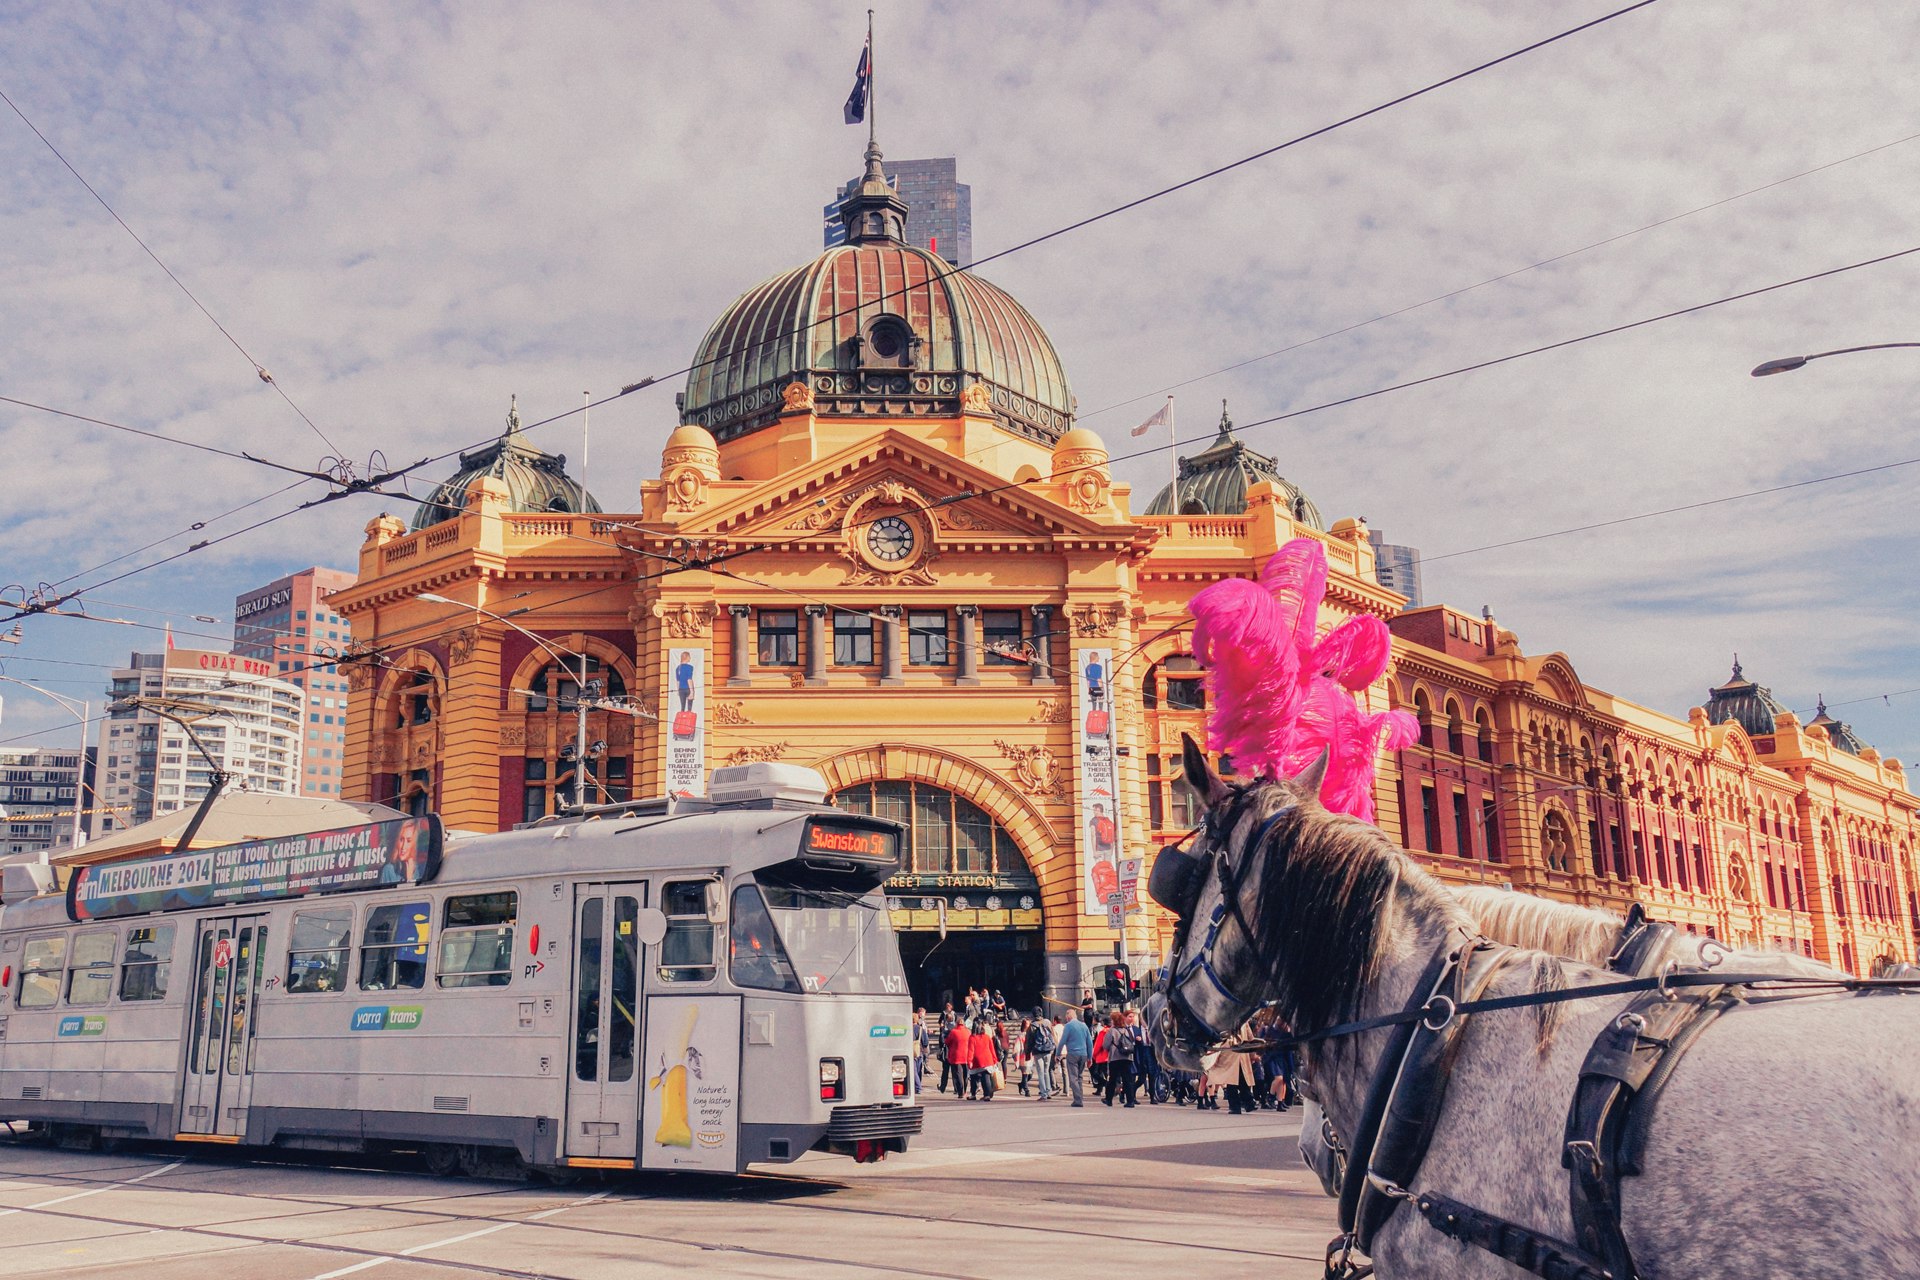 A busy day in Melbourne outside the iconic Flinders street station. A tram, as well as a horse and carriage, are getting people where they need to go.